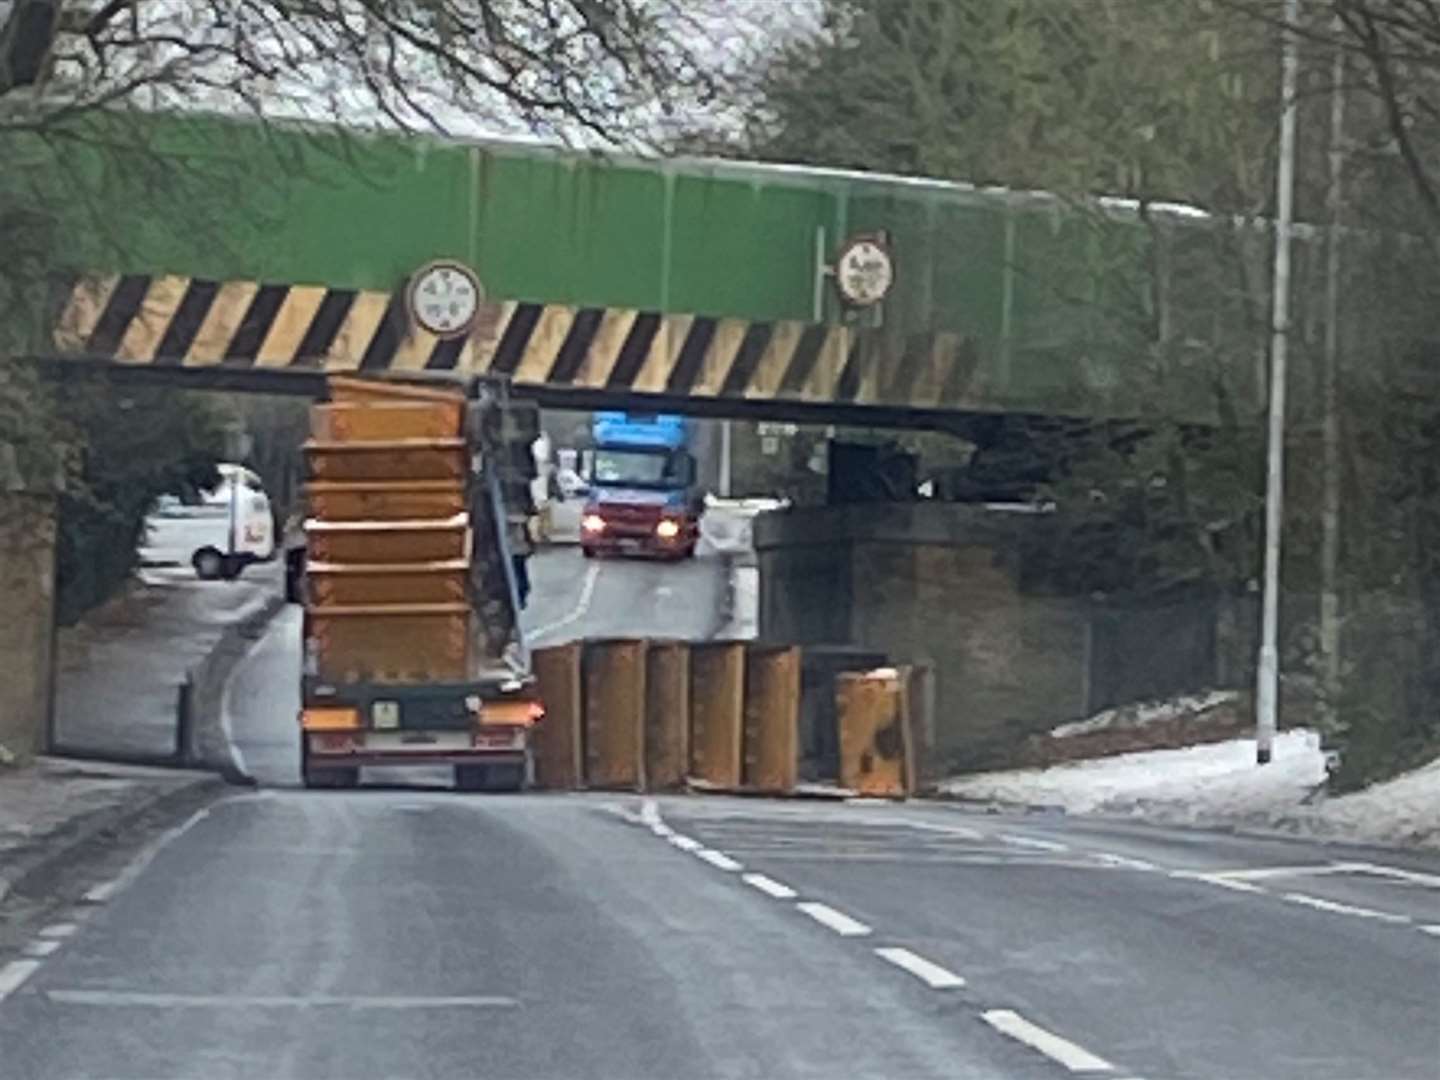 A lorry lost its load in Harrietsham, Maidstone. Picture: Dice Wood